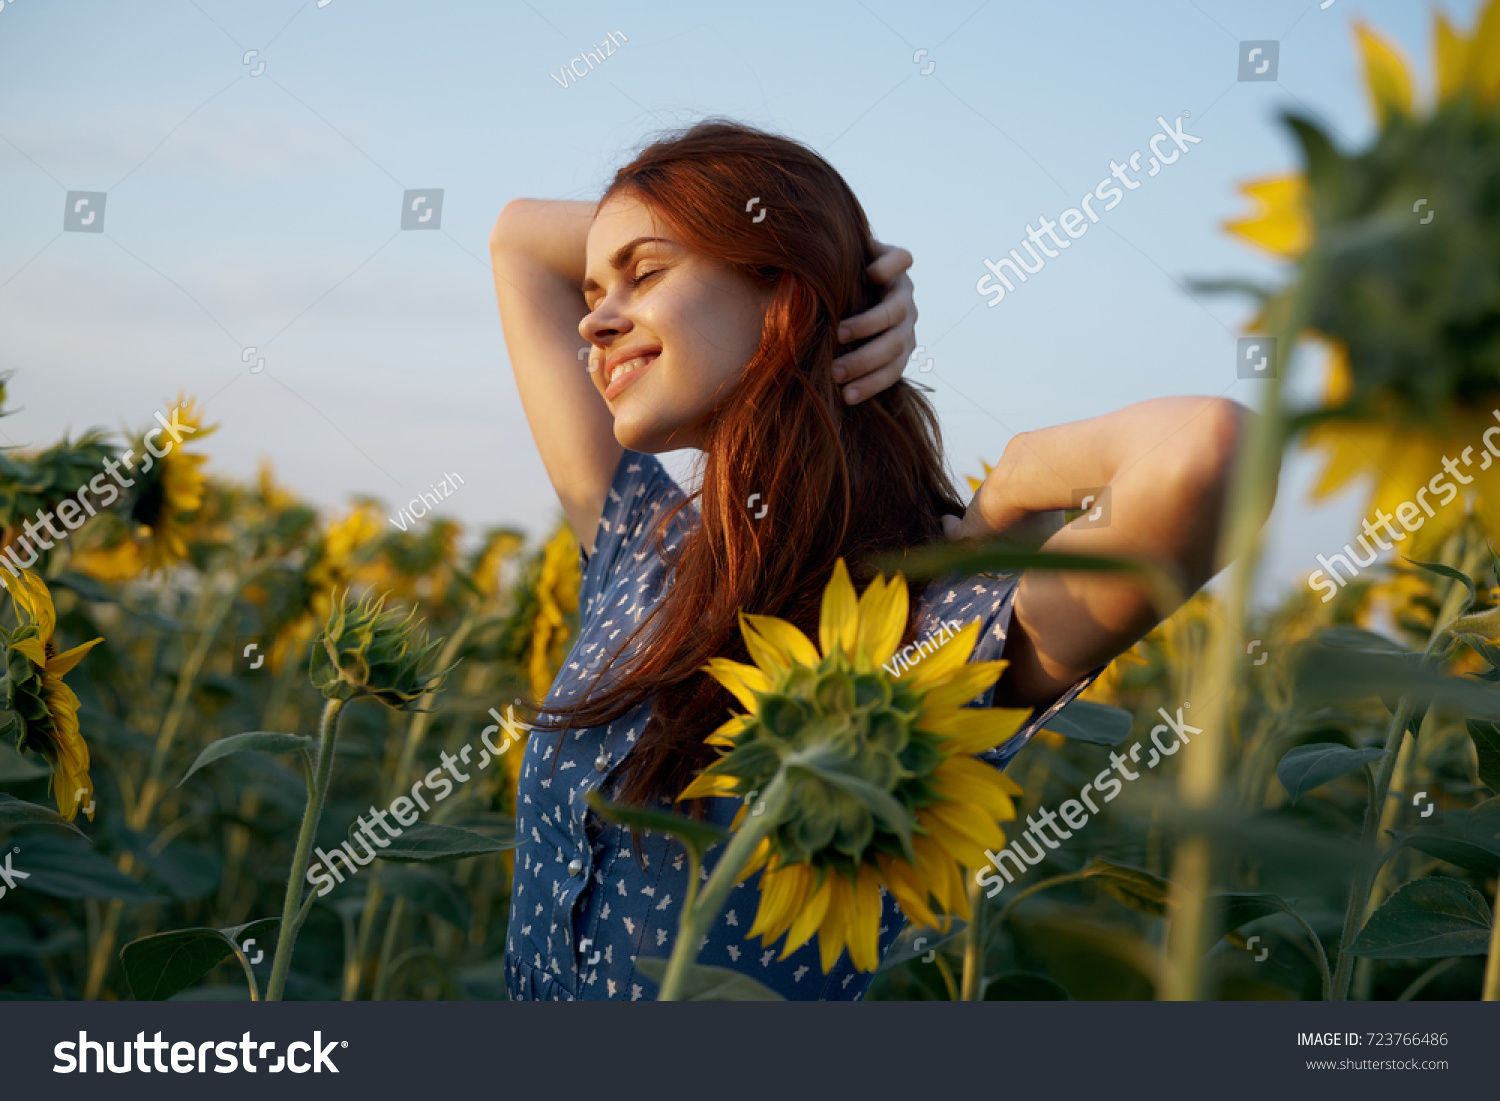 happy woman with closed eyes adjusts her hair in a field of sunflowers, a flowering of yellow flowers, nature                                #723766486